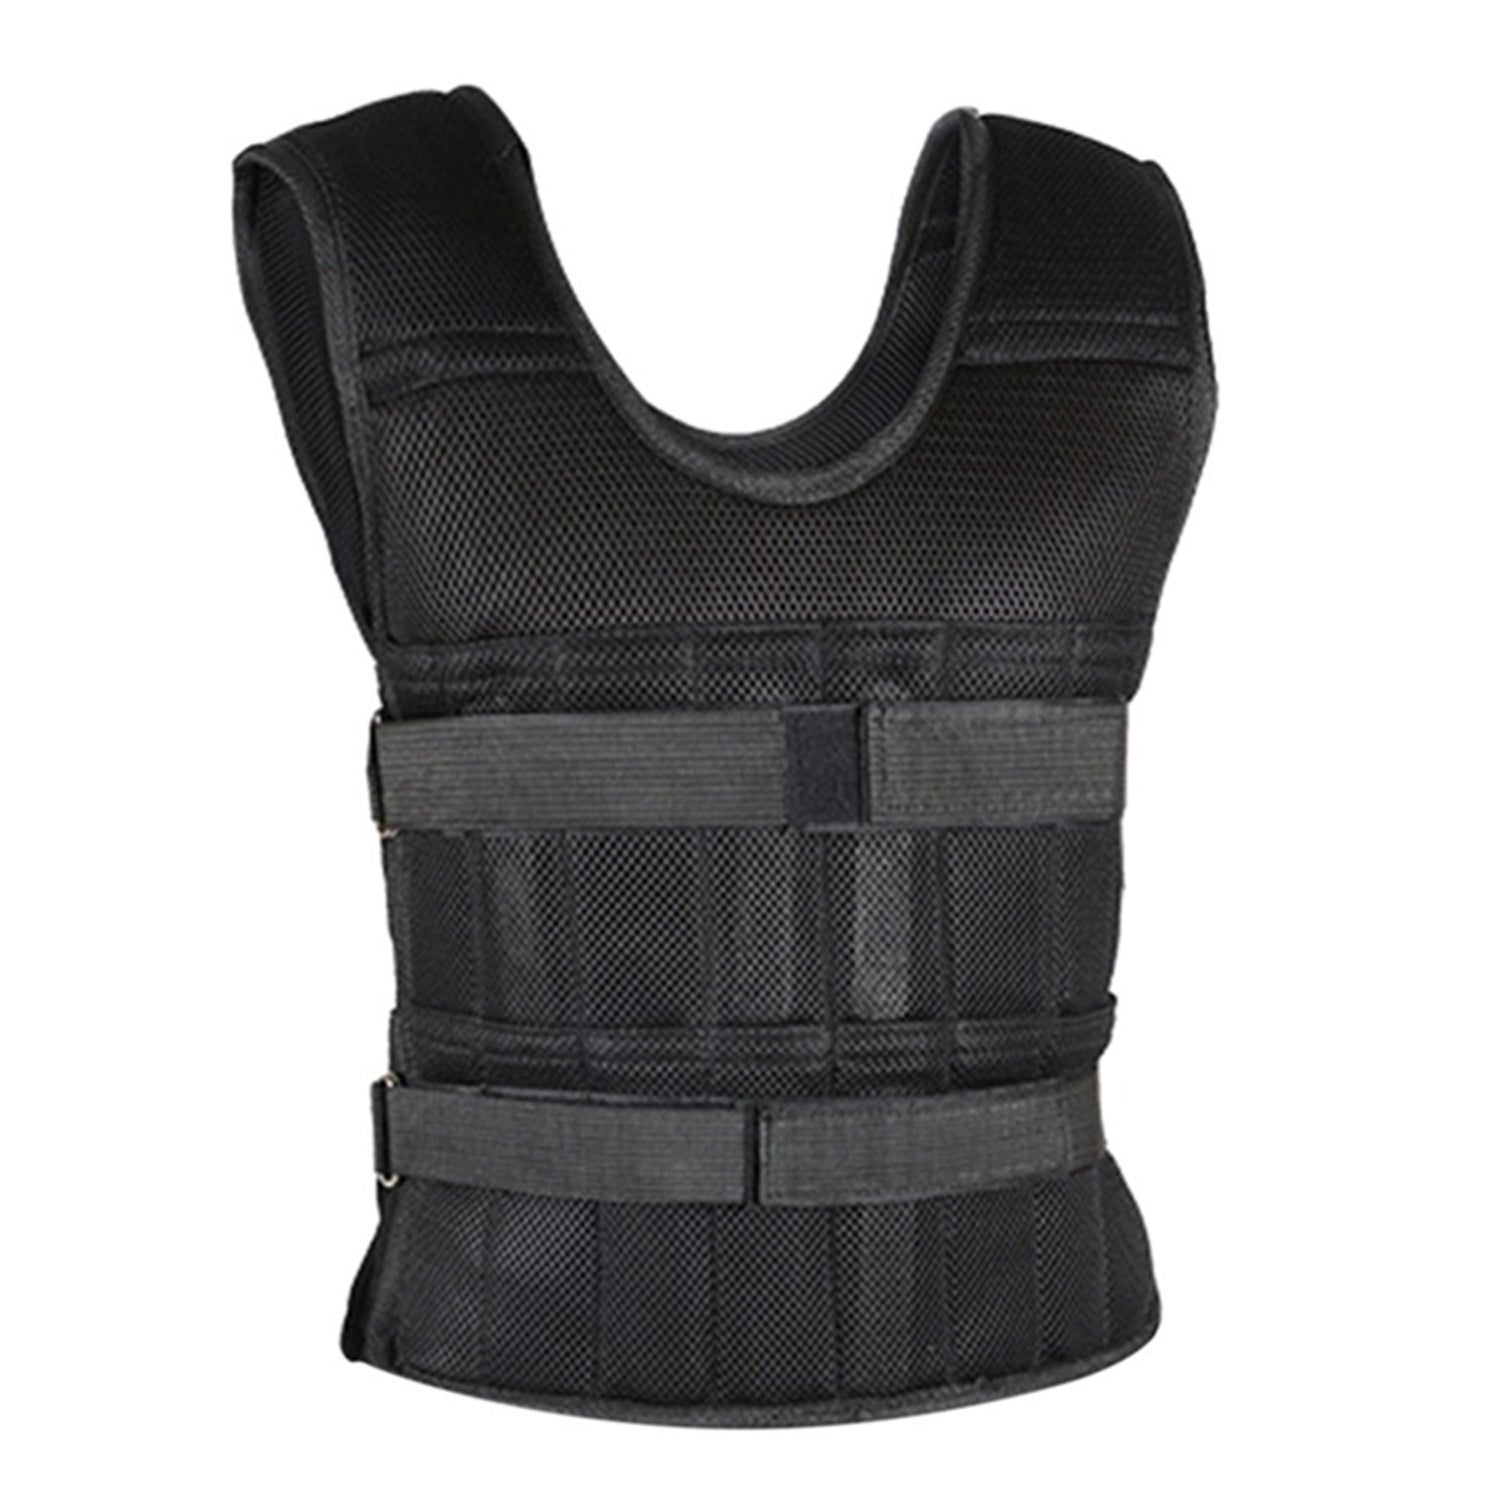 TODO 15kg Capacity Weight Vest Weighted Resistance Training VEST ONLY Load Bearing Running Gym